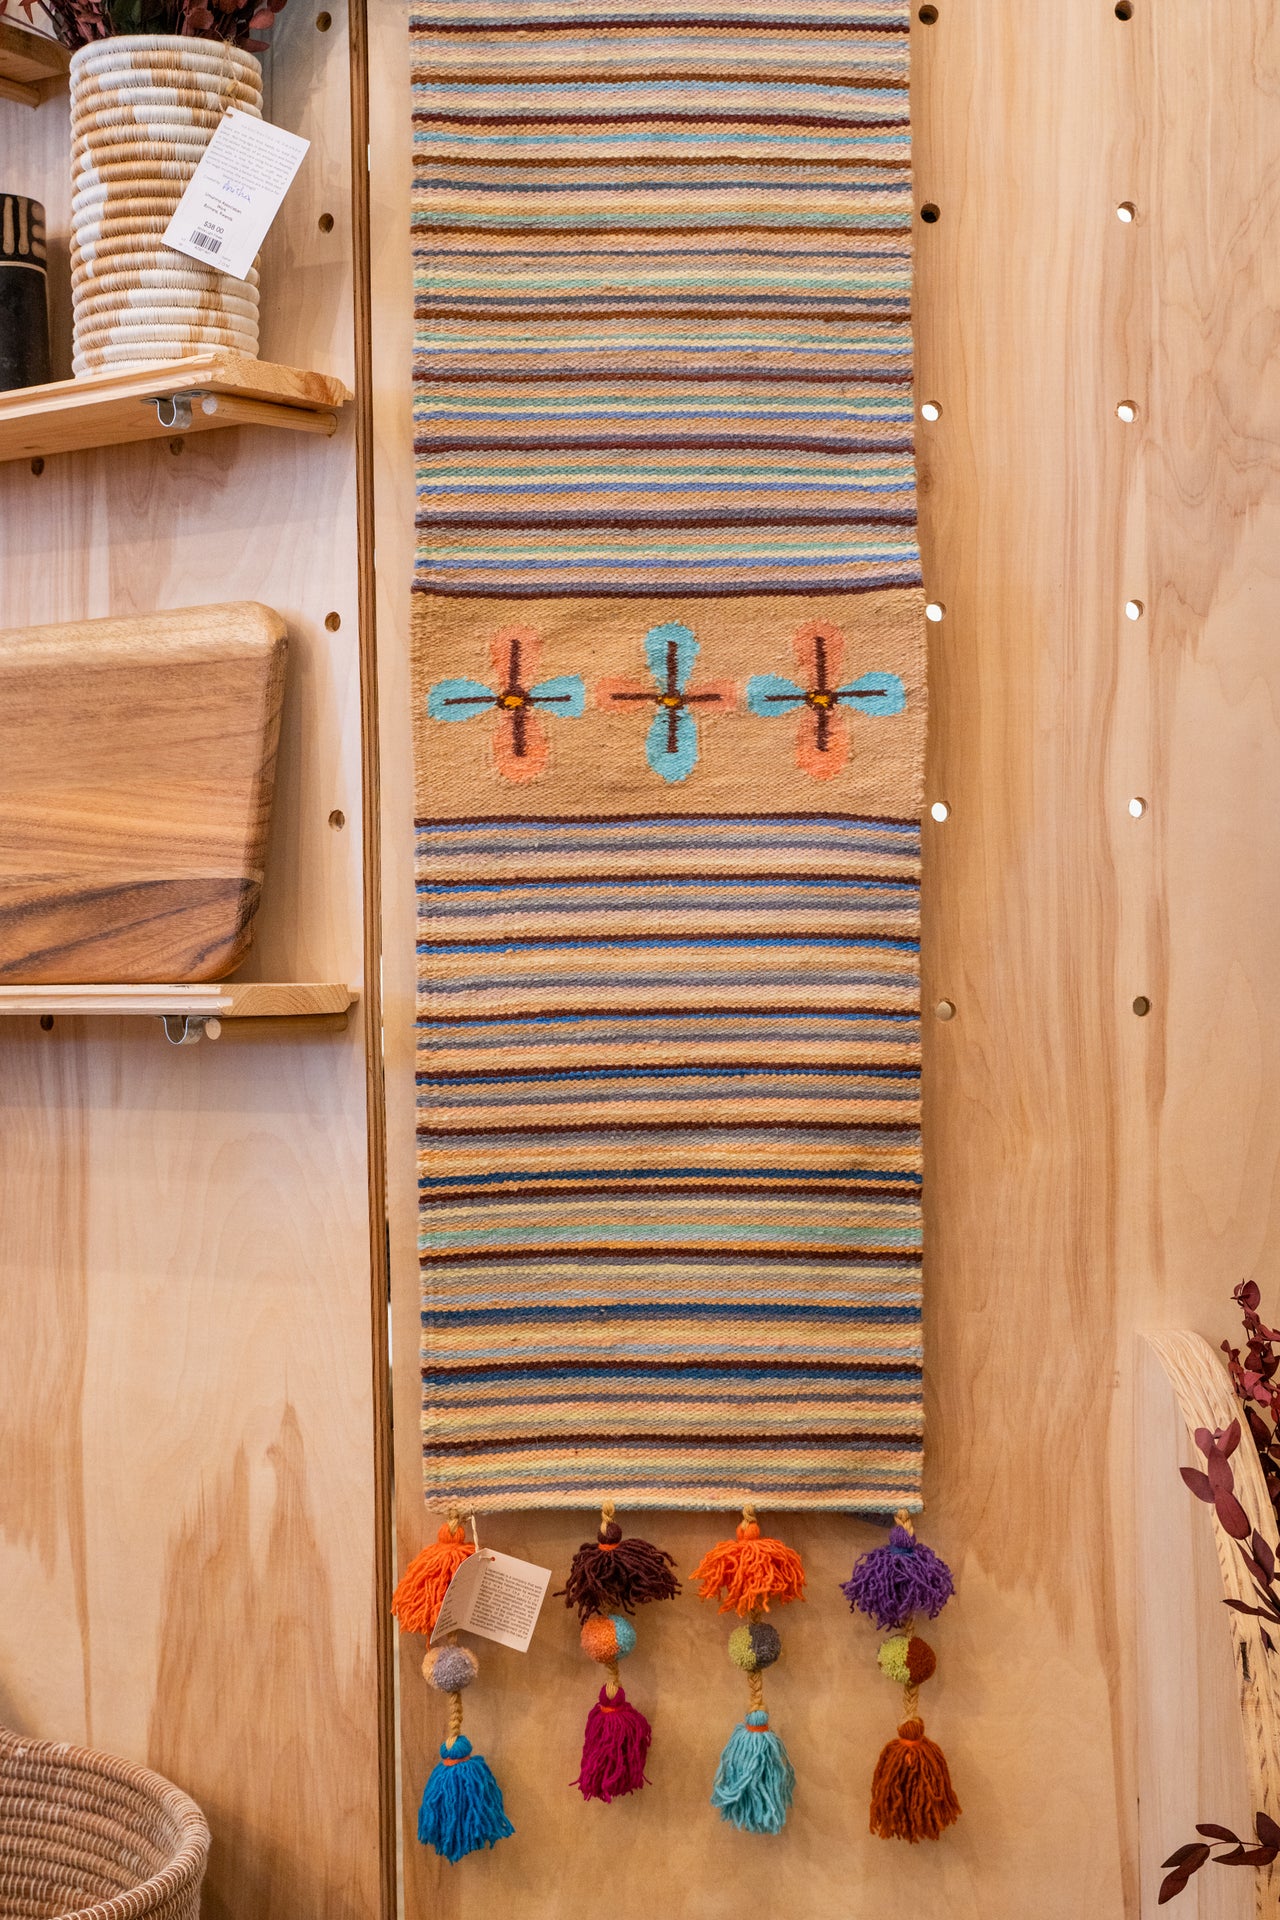 Loom Woven Wall Hangings / Table Table Runners